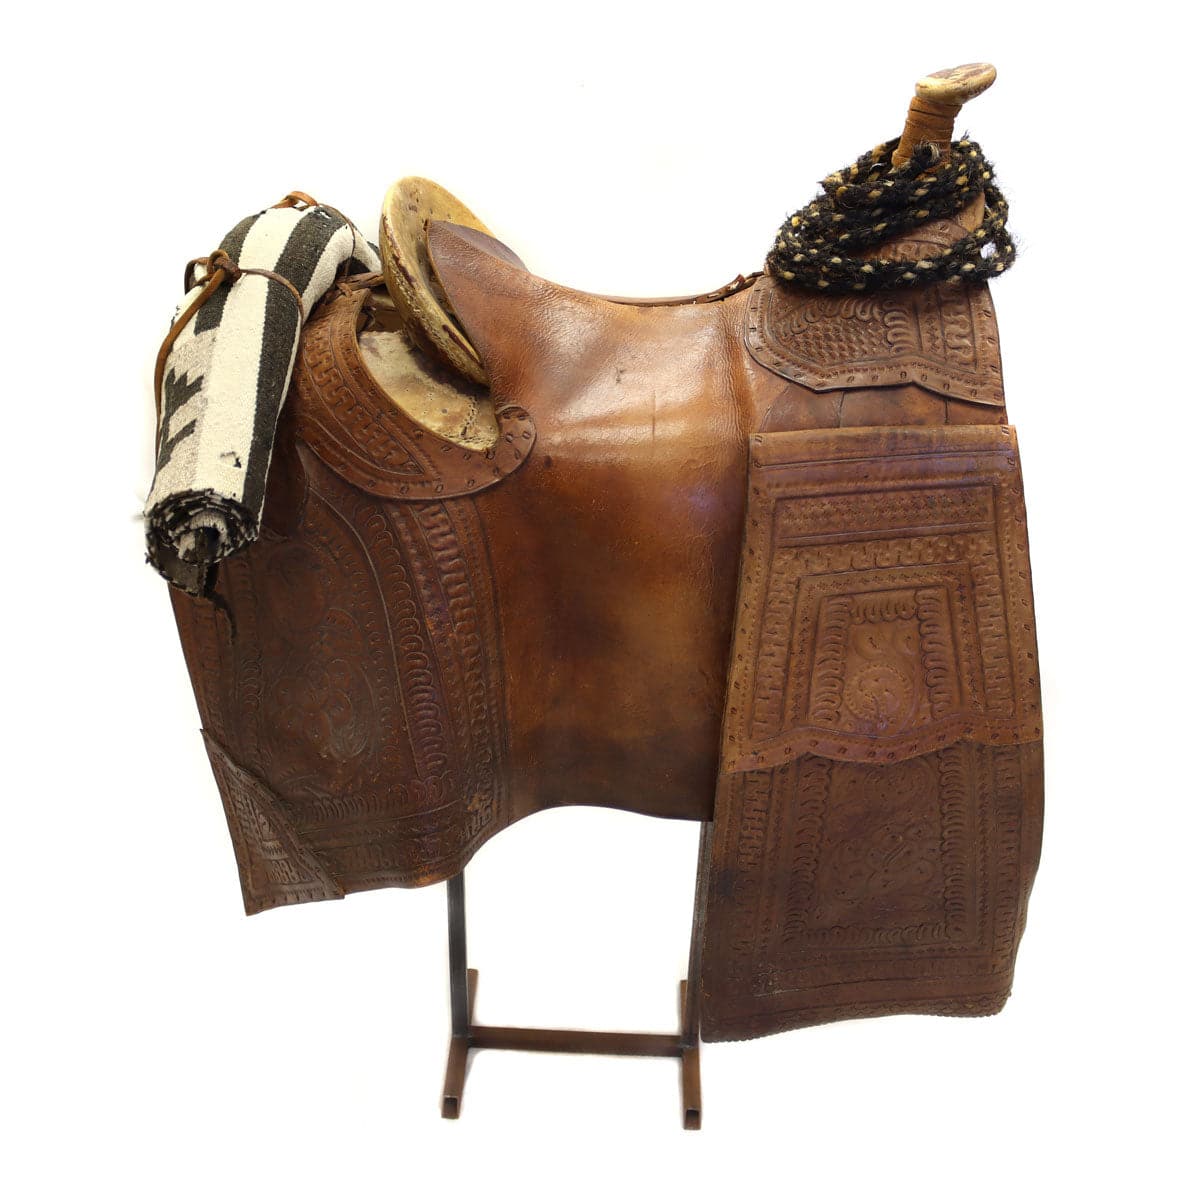 Mexican Sinaloa Mochila Leather Saddle c. 1880s with c. 1930-40s Navajo Double Saddle Blanket on Custom Stand, 35" x 27" x 30" (M92323A-1021-001)2